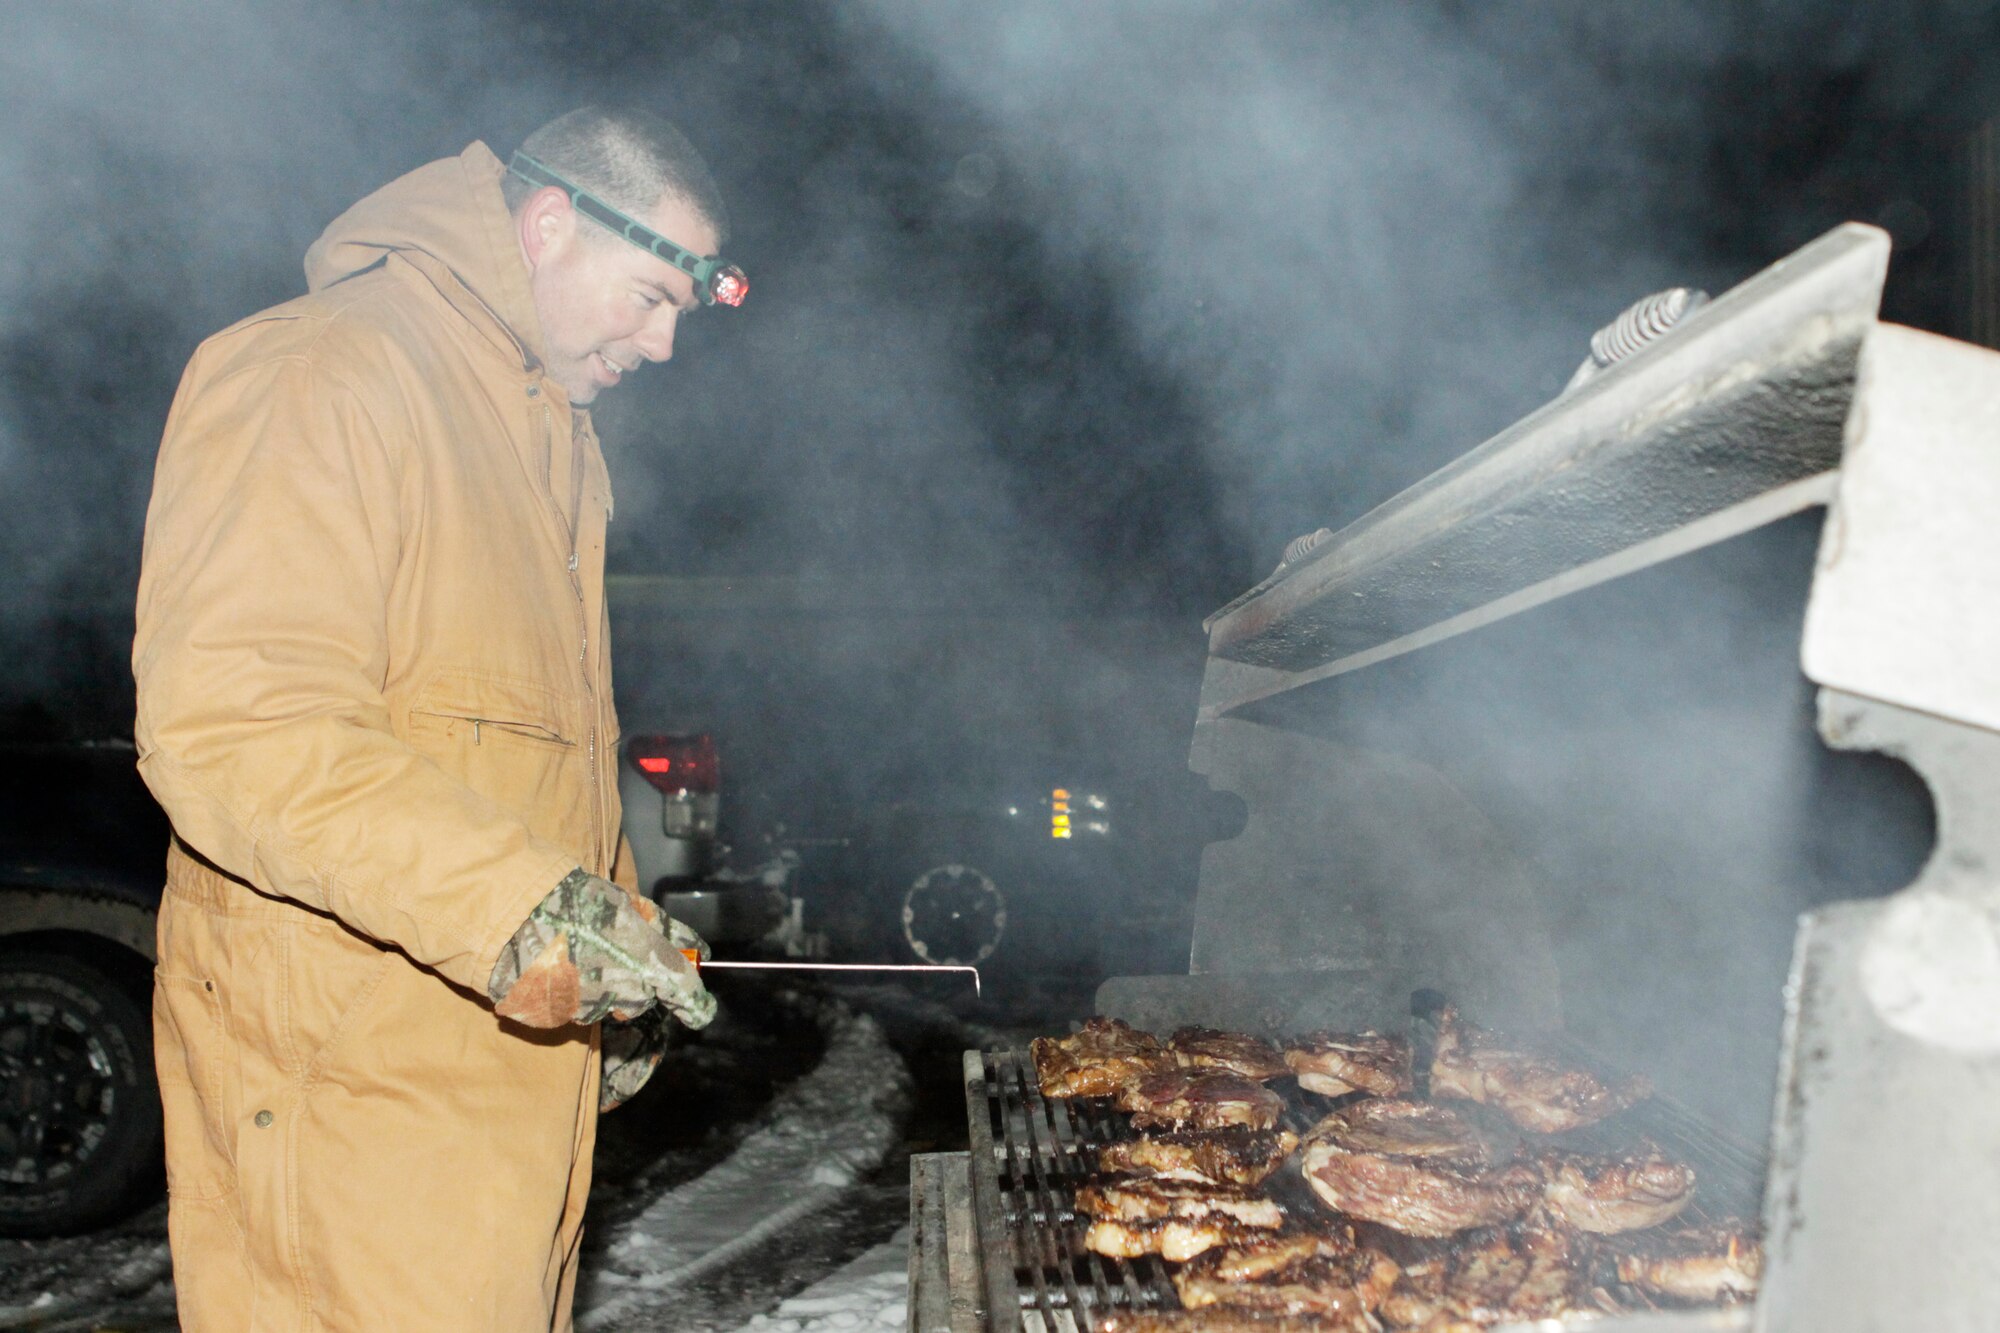 Master Sgt. Frank Deitchman, 513th Air Control Group, watches the rib eyes with a
careful eye as he works to stay warm in the below-freezing temperatures. (U.S. Air Force Photo/Staff Sgt. Caleb Wanzer)